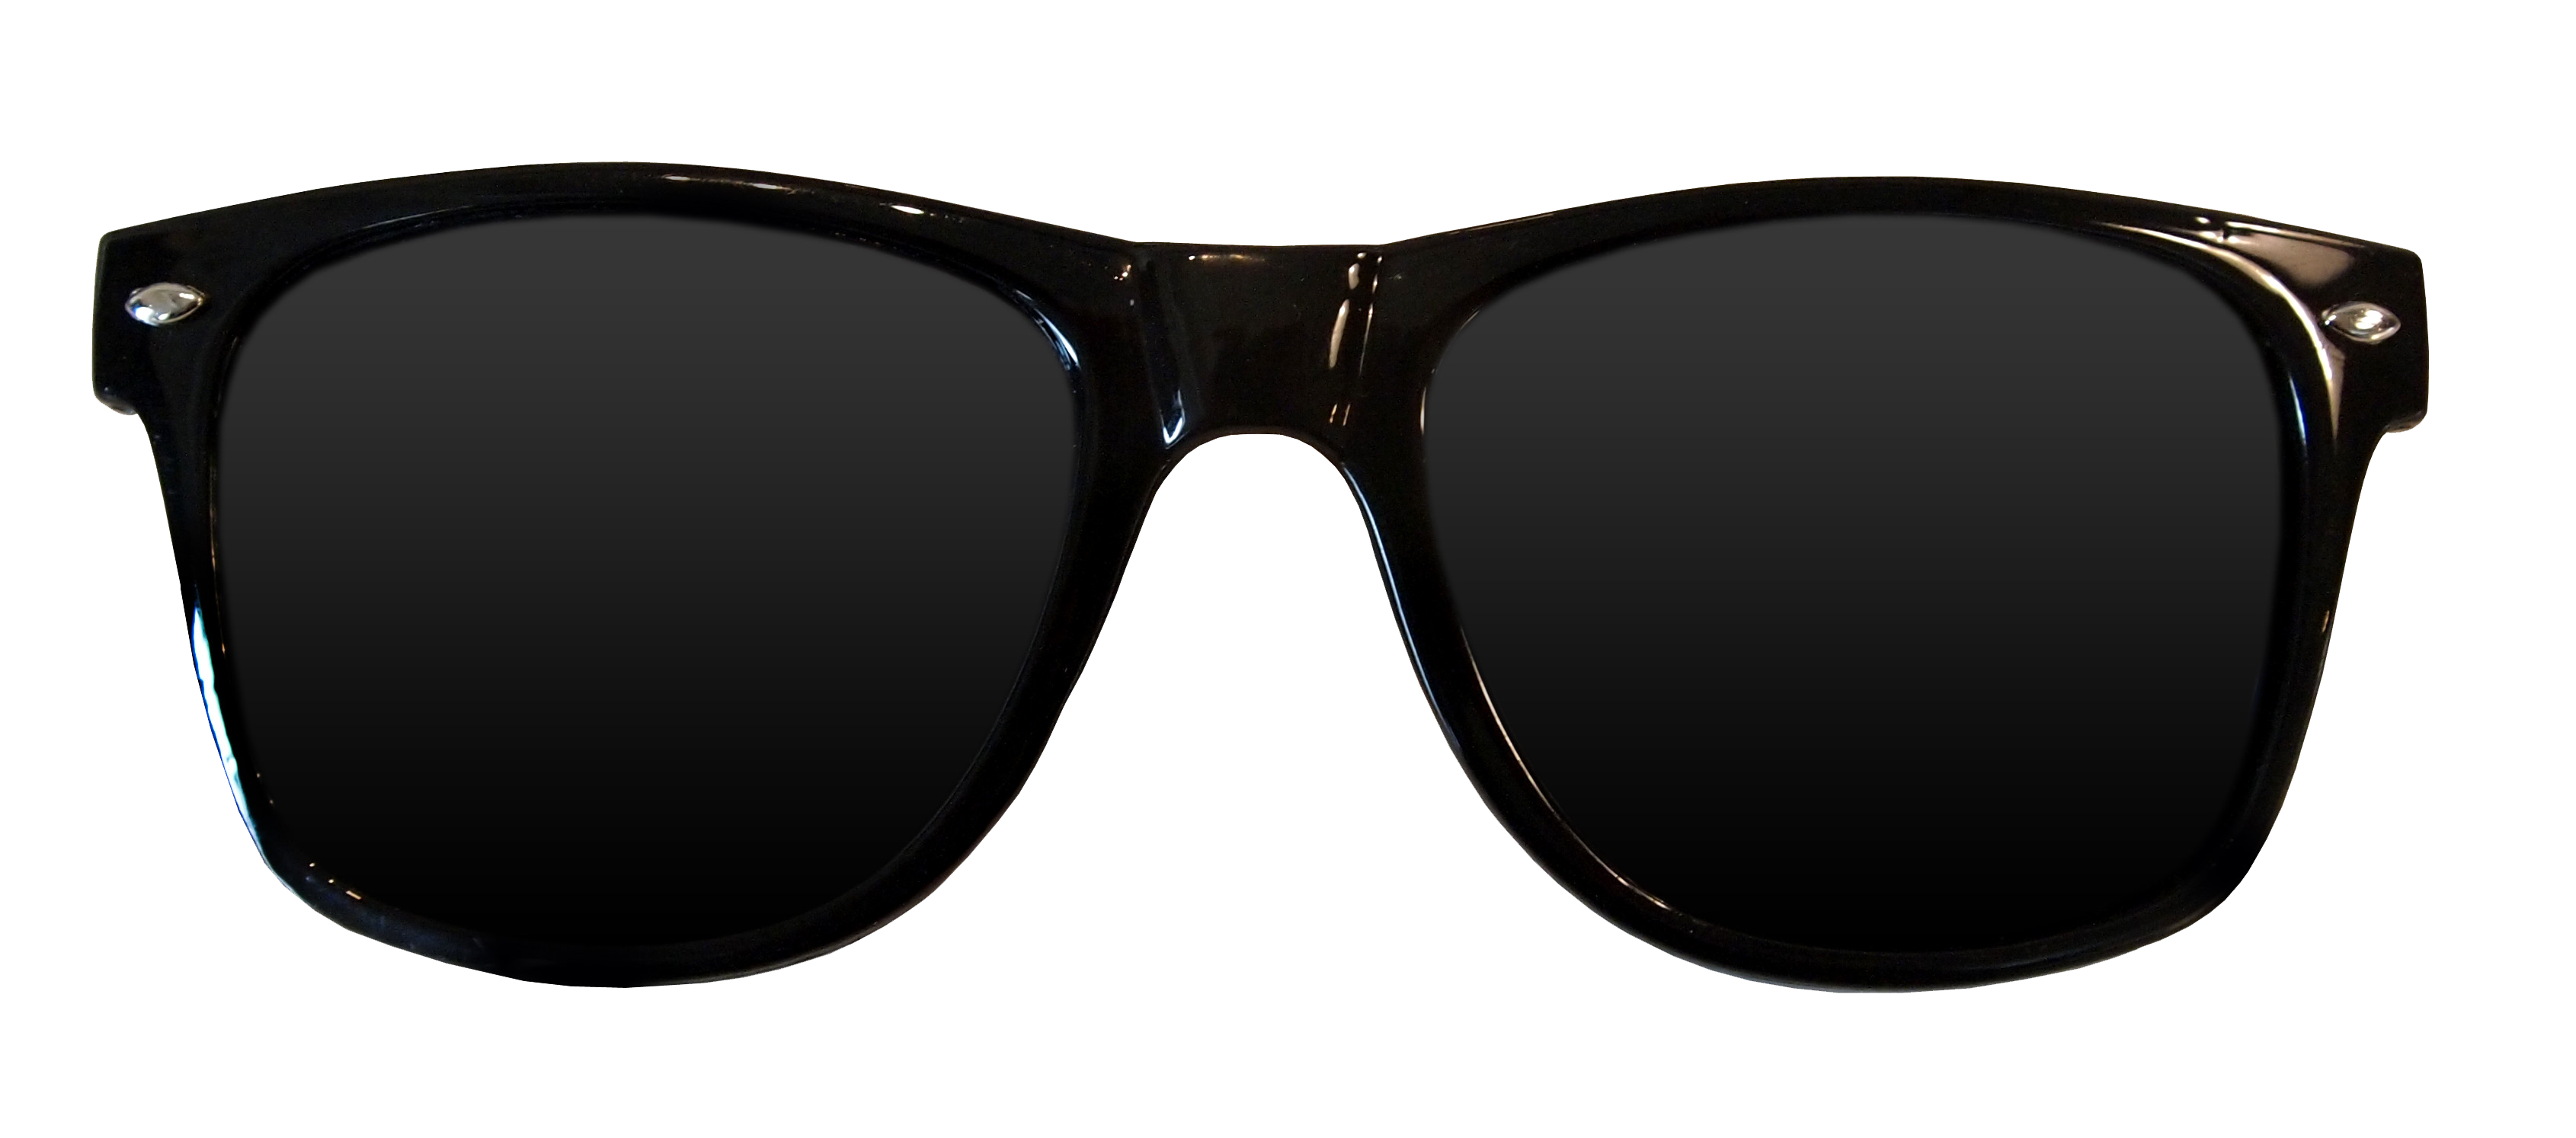 Glasses Png Hd PNG Image